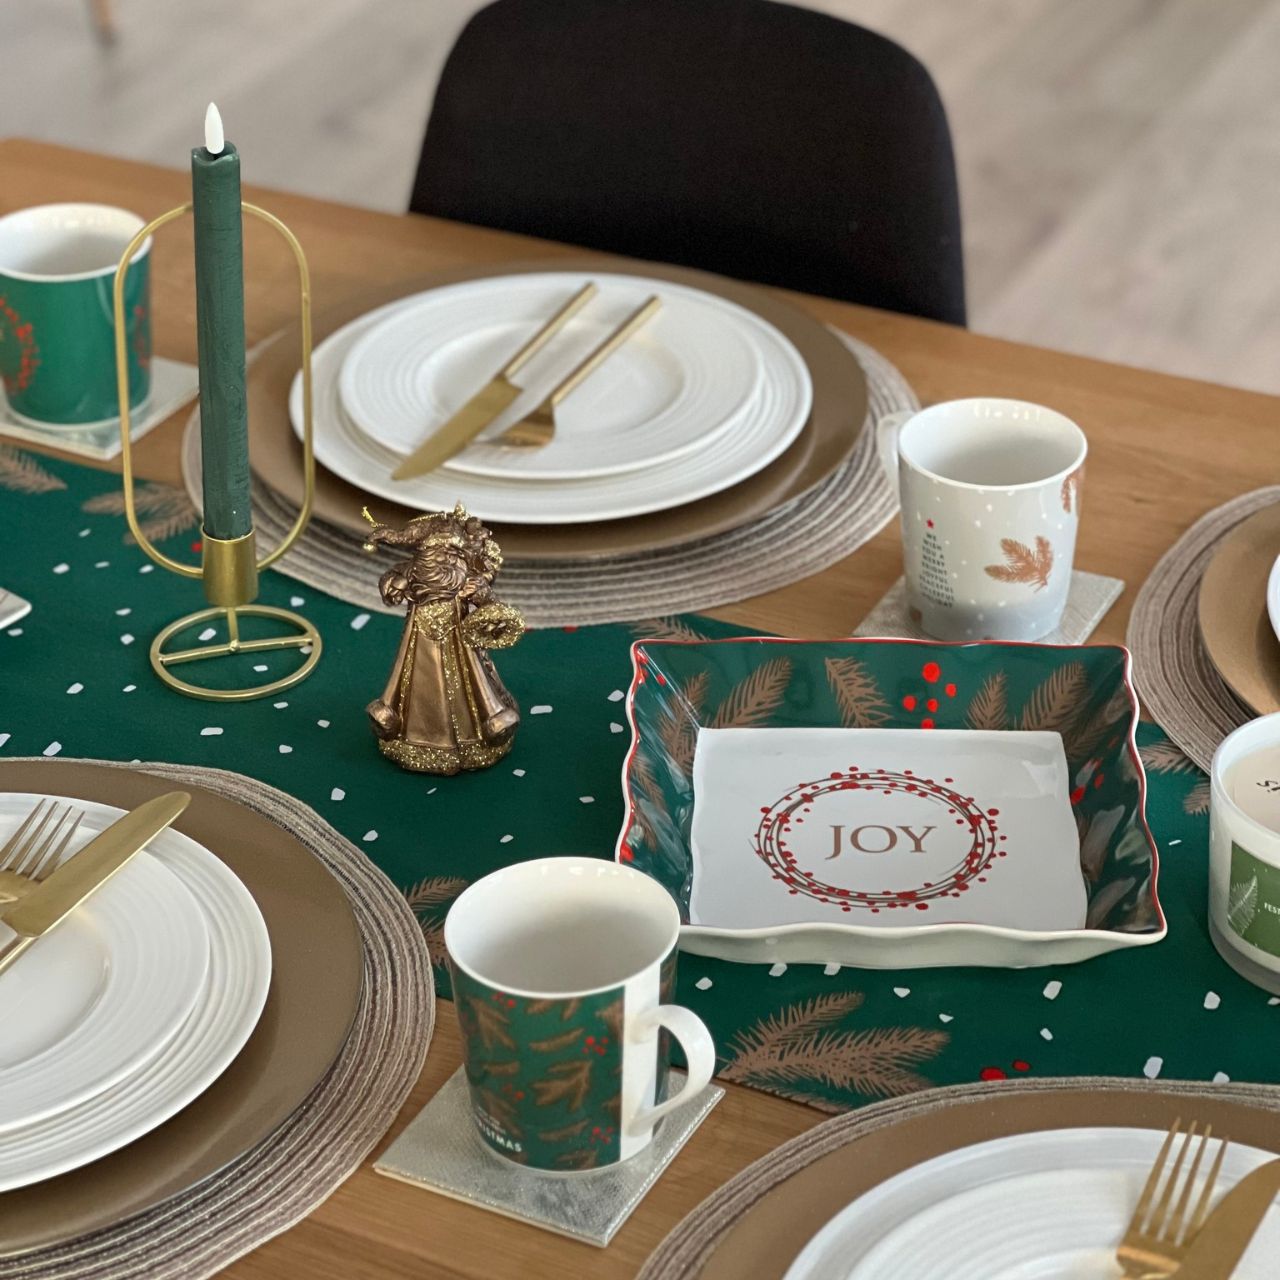 Christmas Festive Fir Table Runner by Mindy Brownes Interiors  Introducing our Festive Fir collection. This charming collection is adorned with beautiful designs inspired by Christmas fir branches, red berries, and heartwarming holiday messages on green and white backgrounds.